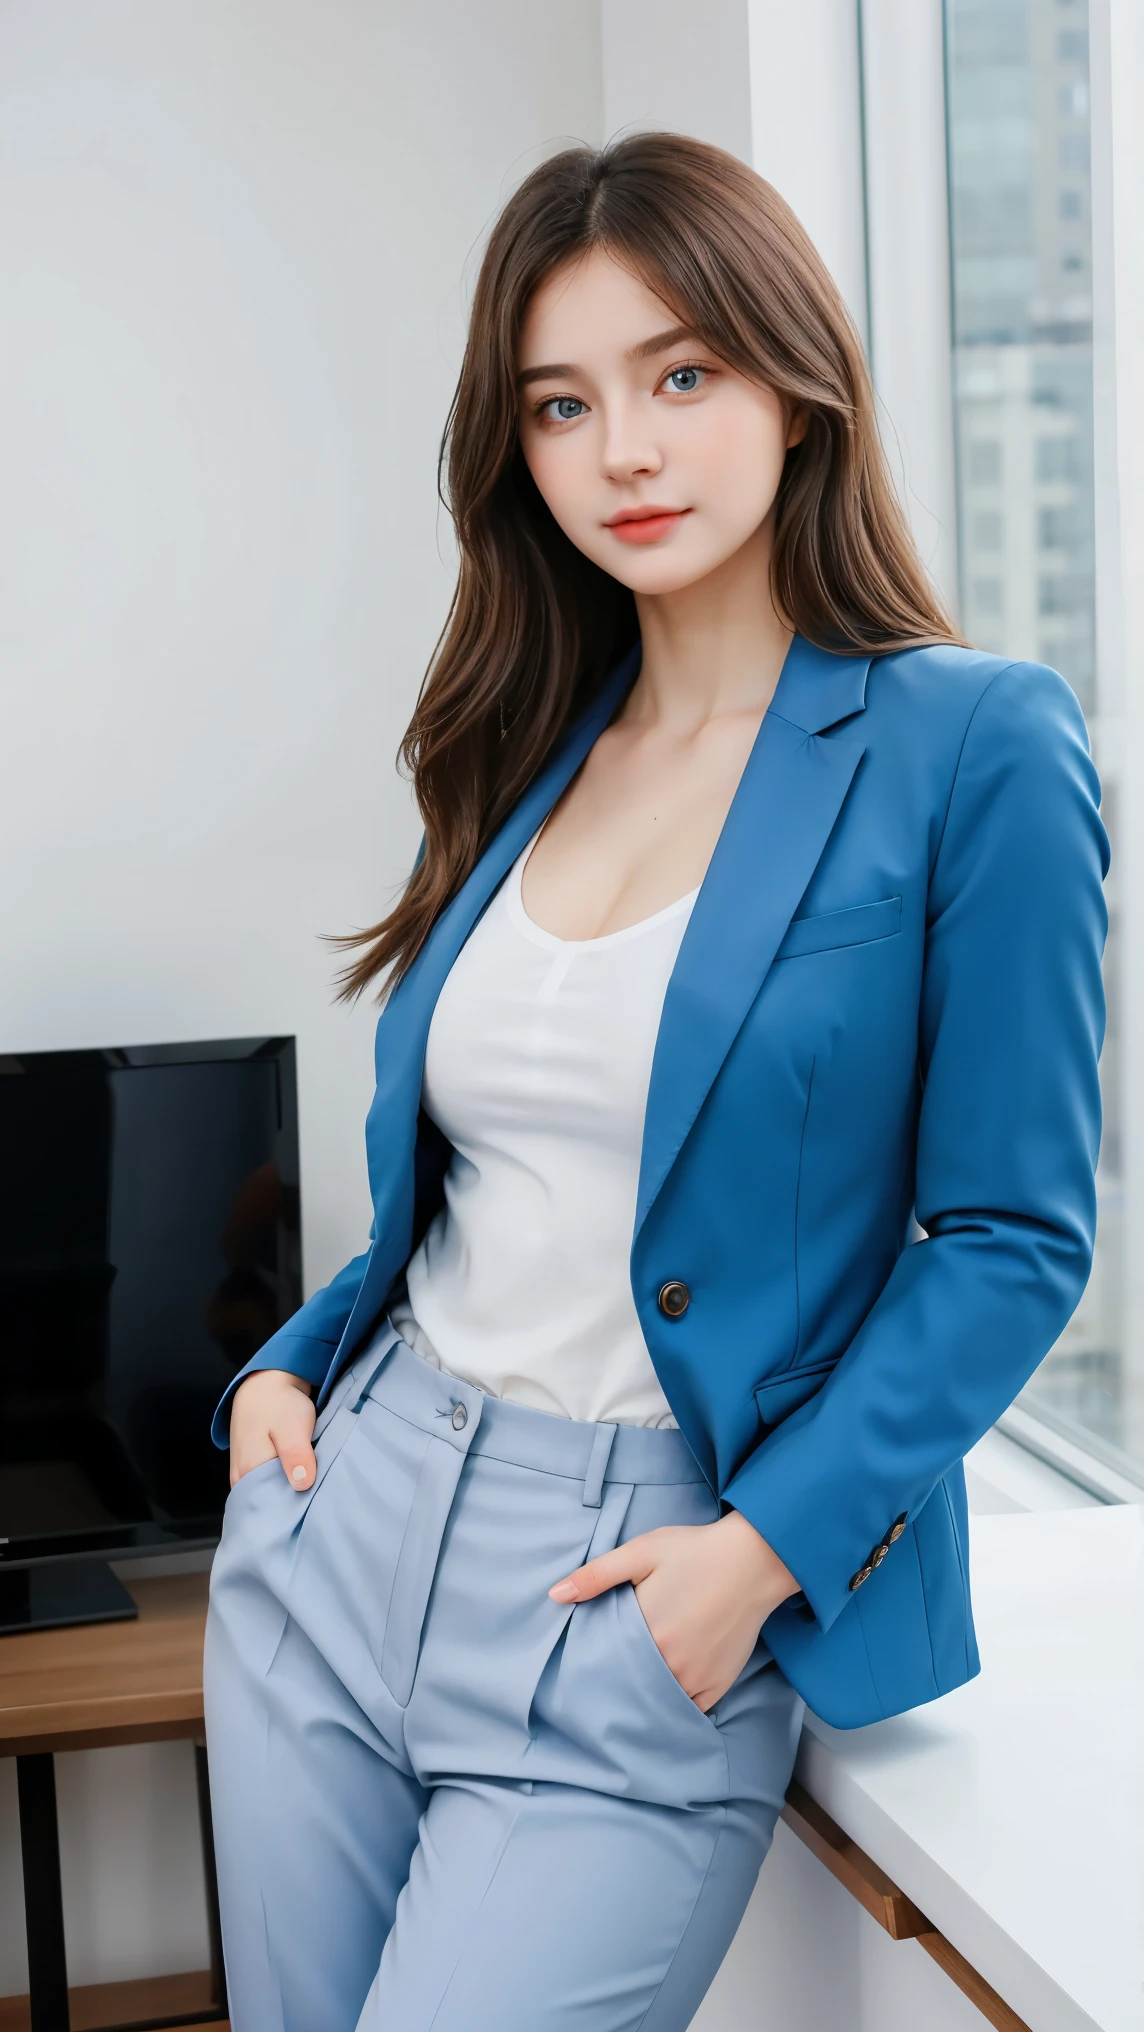 Gorgeus Girl, Beautiful, Baby Face, 20 Years Old, White Skin, Beside, Sexy Pose, business suits, Blue Eye, Muscles, Bokeh, Modern living room Background, Masterpiece, Fullbody Shot, woman trousers, blazers